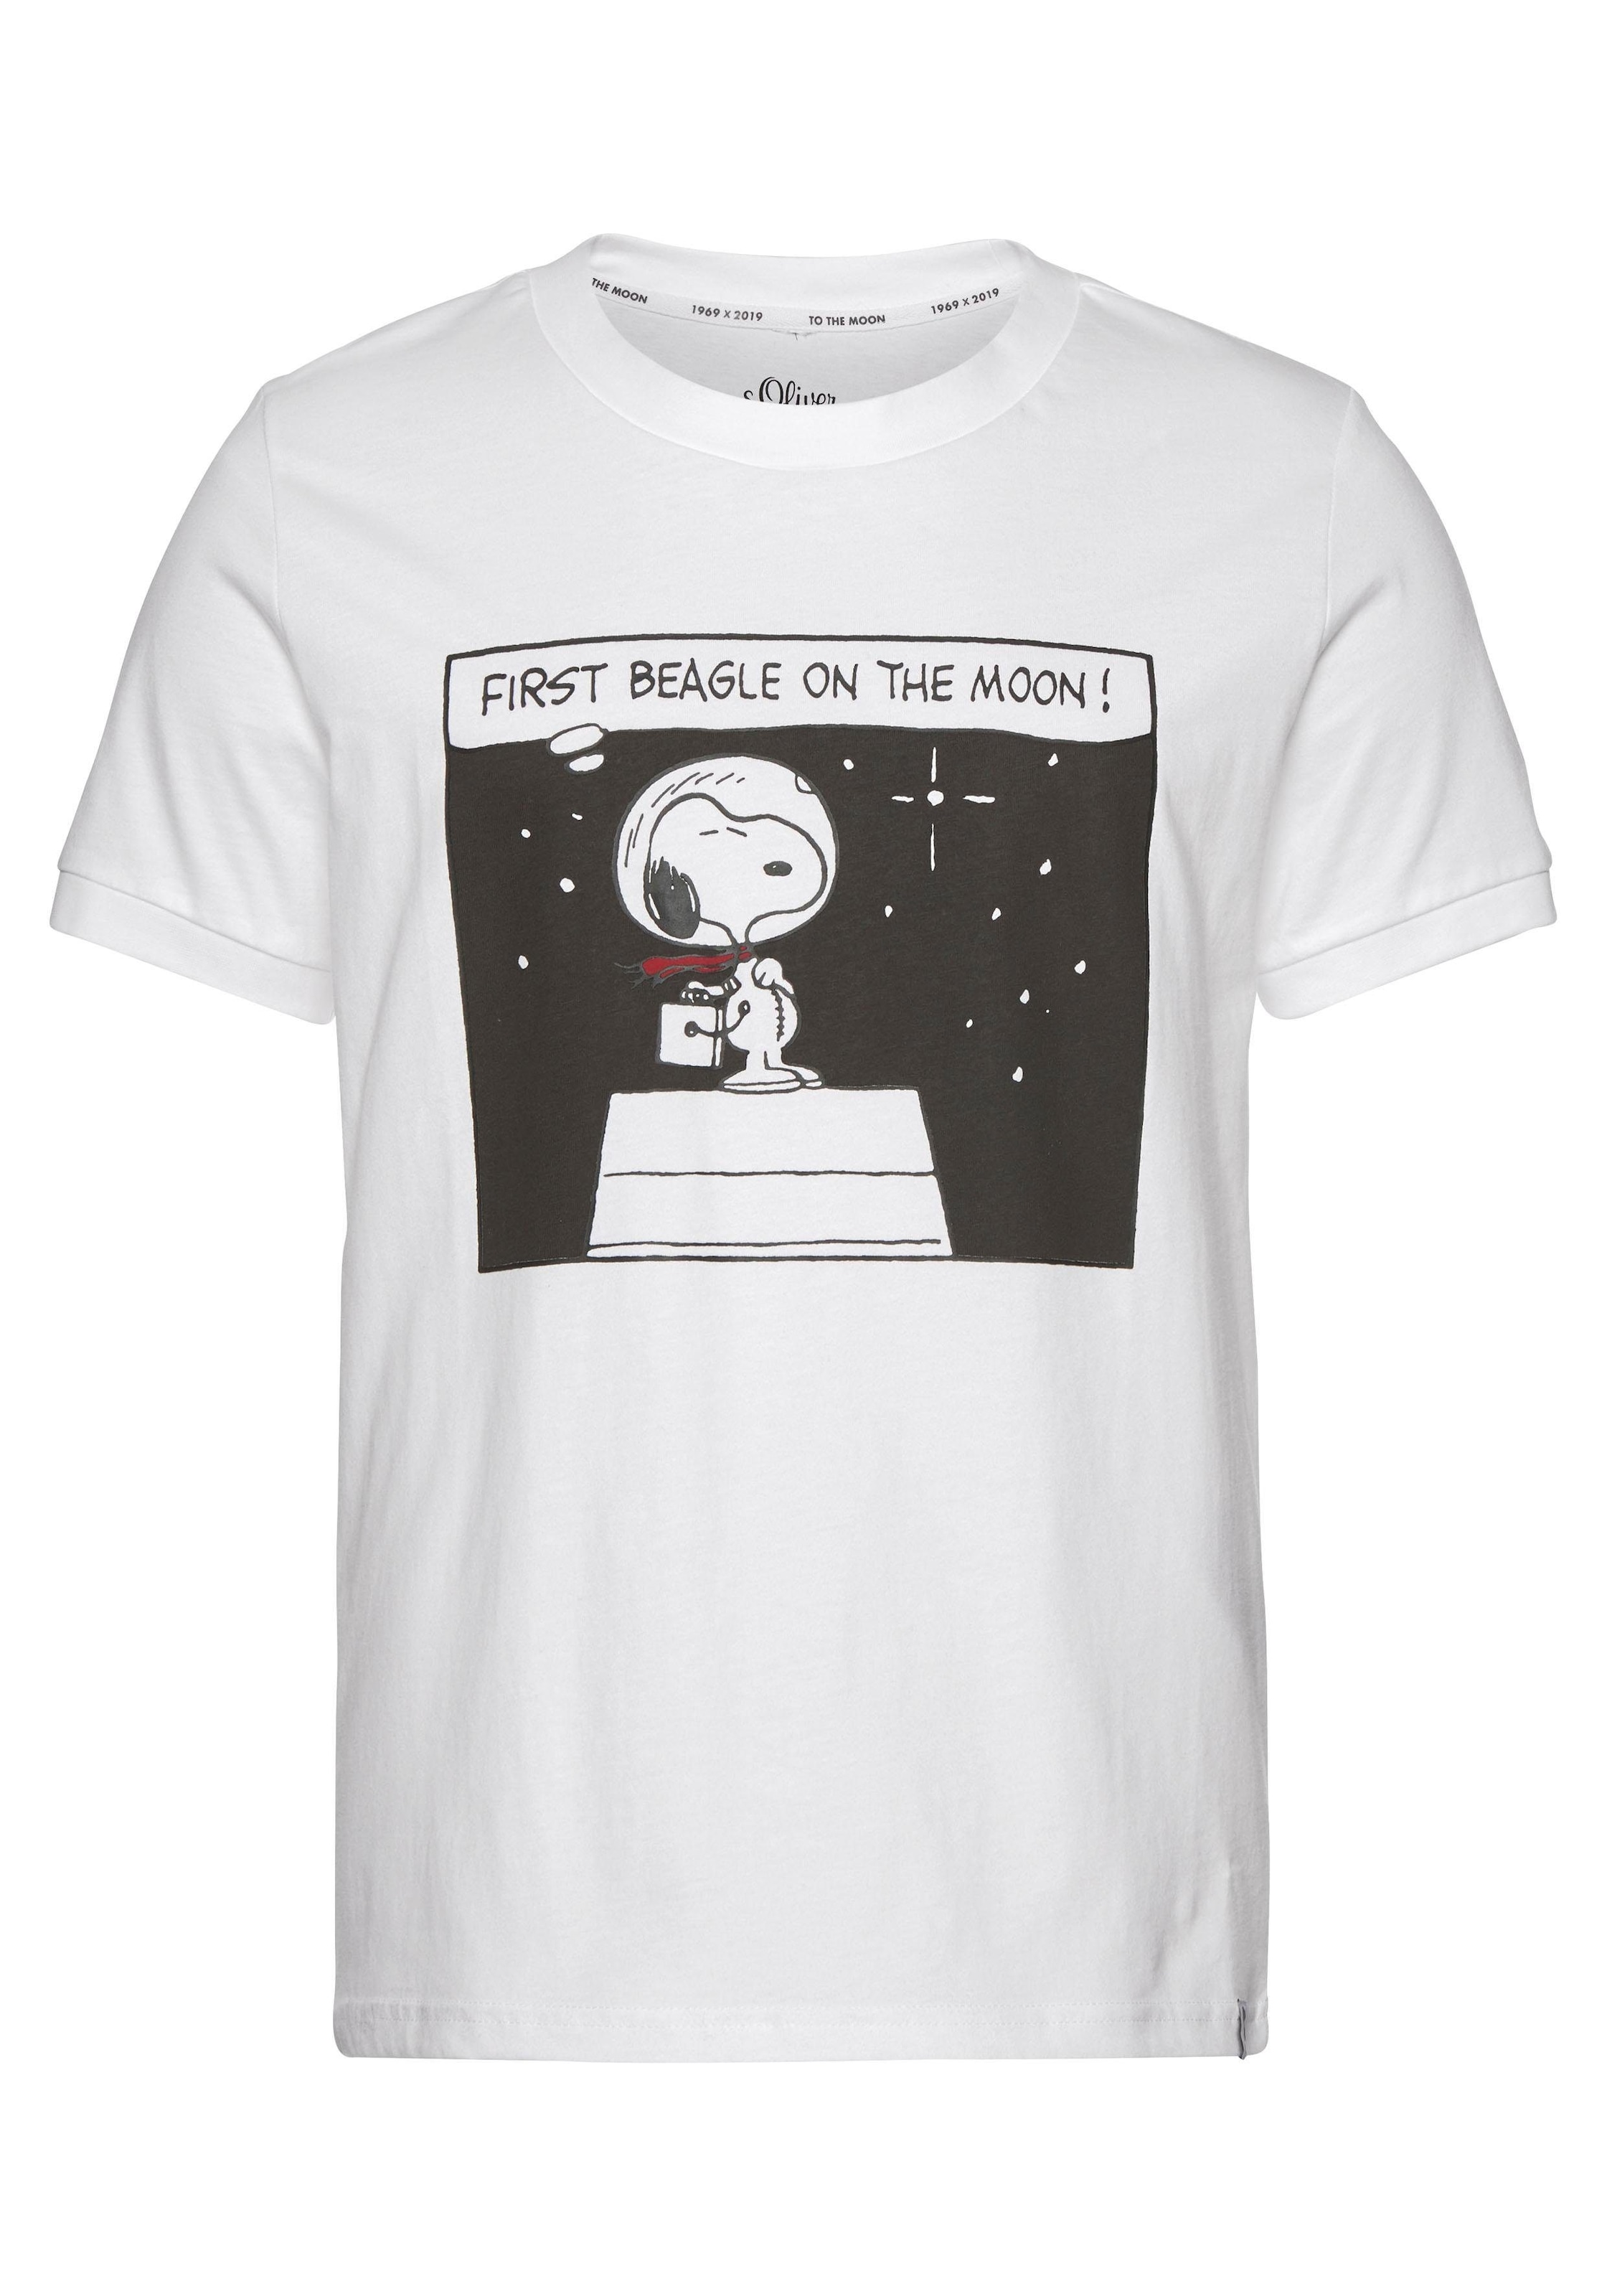 s.Oliver T-Shirt, mit Snoopy Print bei